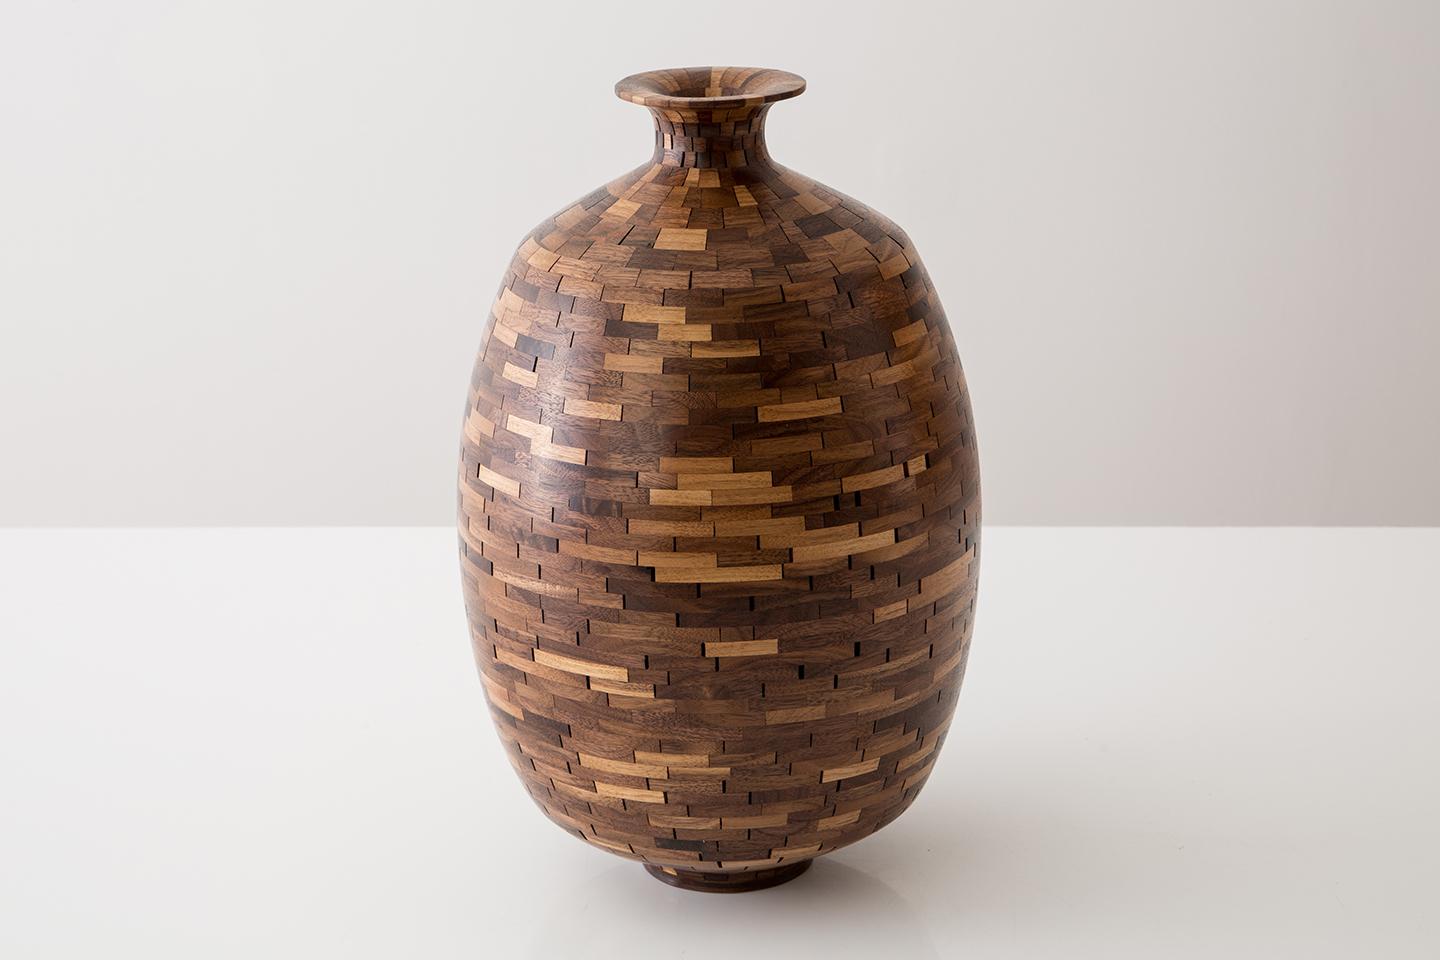 Part of Richard Haining's STACKED Collection, this vessel uses reclaimed walnut. The salvaged wood was sourced from a variety of local Brooklyn wood shops. The wood's natural coloring shows off tones primarily ranging from mid to dark browns with a